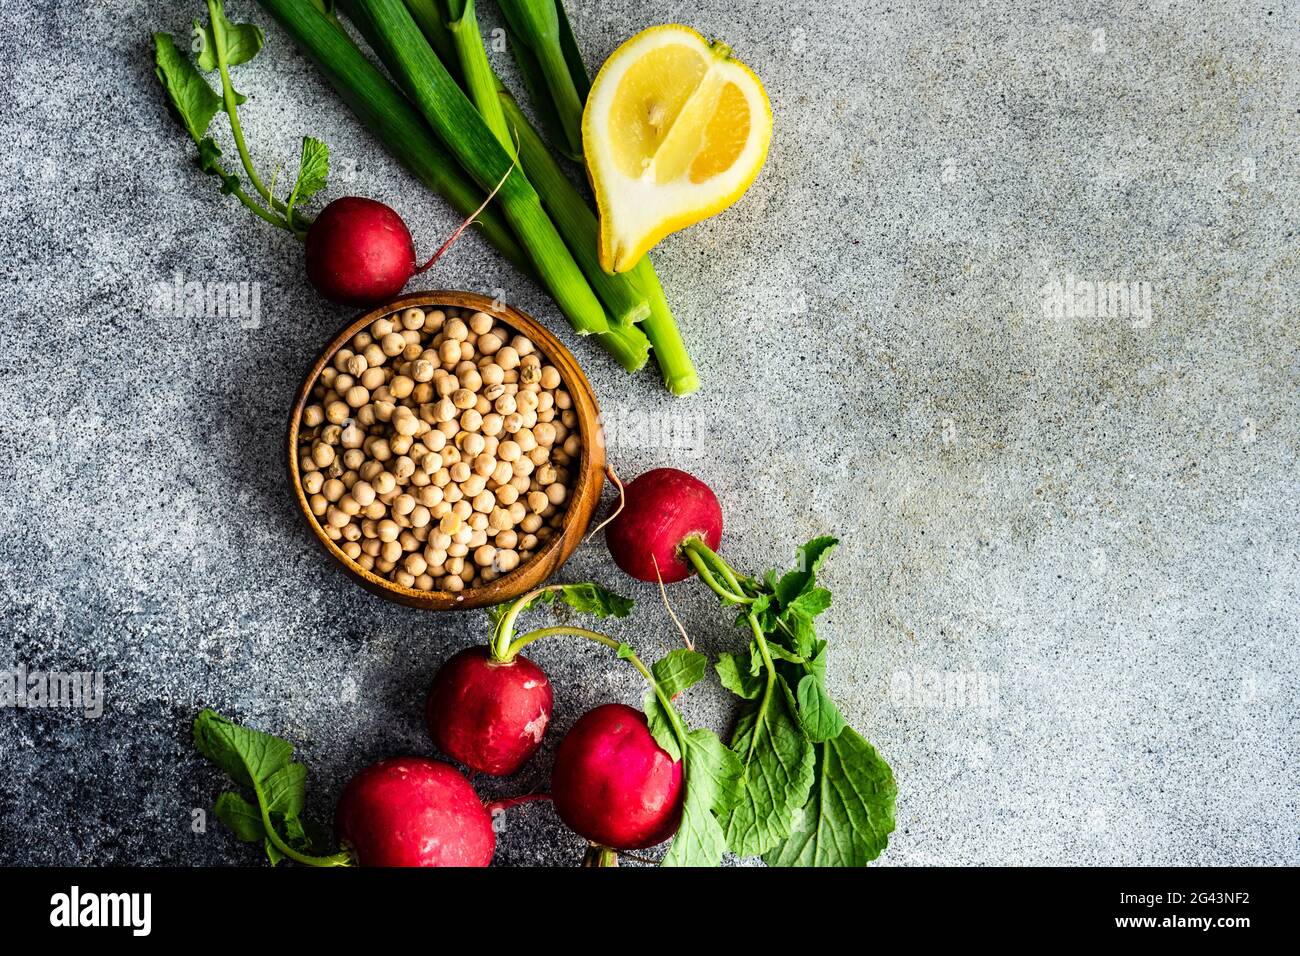 Cooking concept with organic ingredients Stock Photo